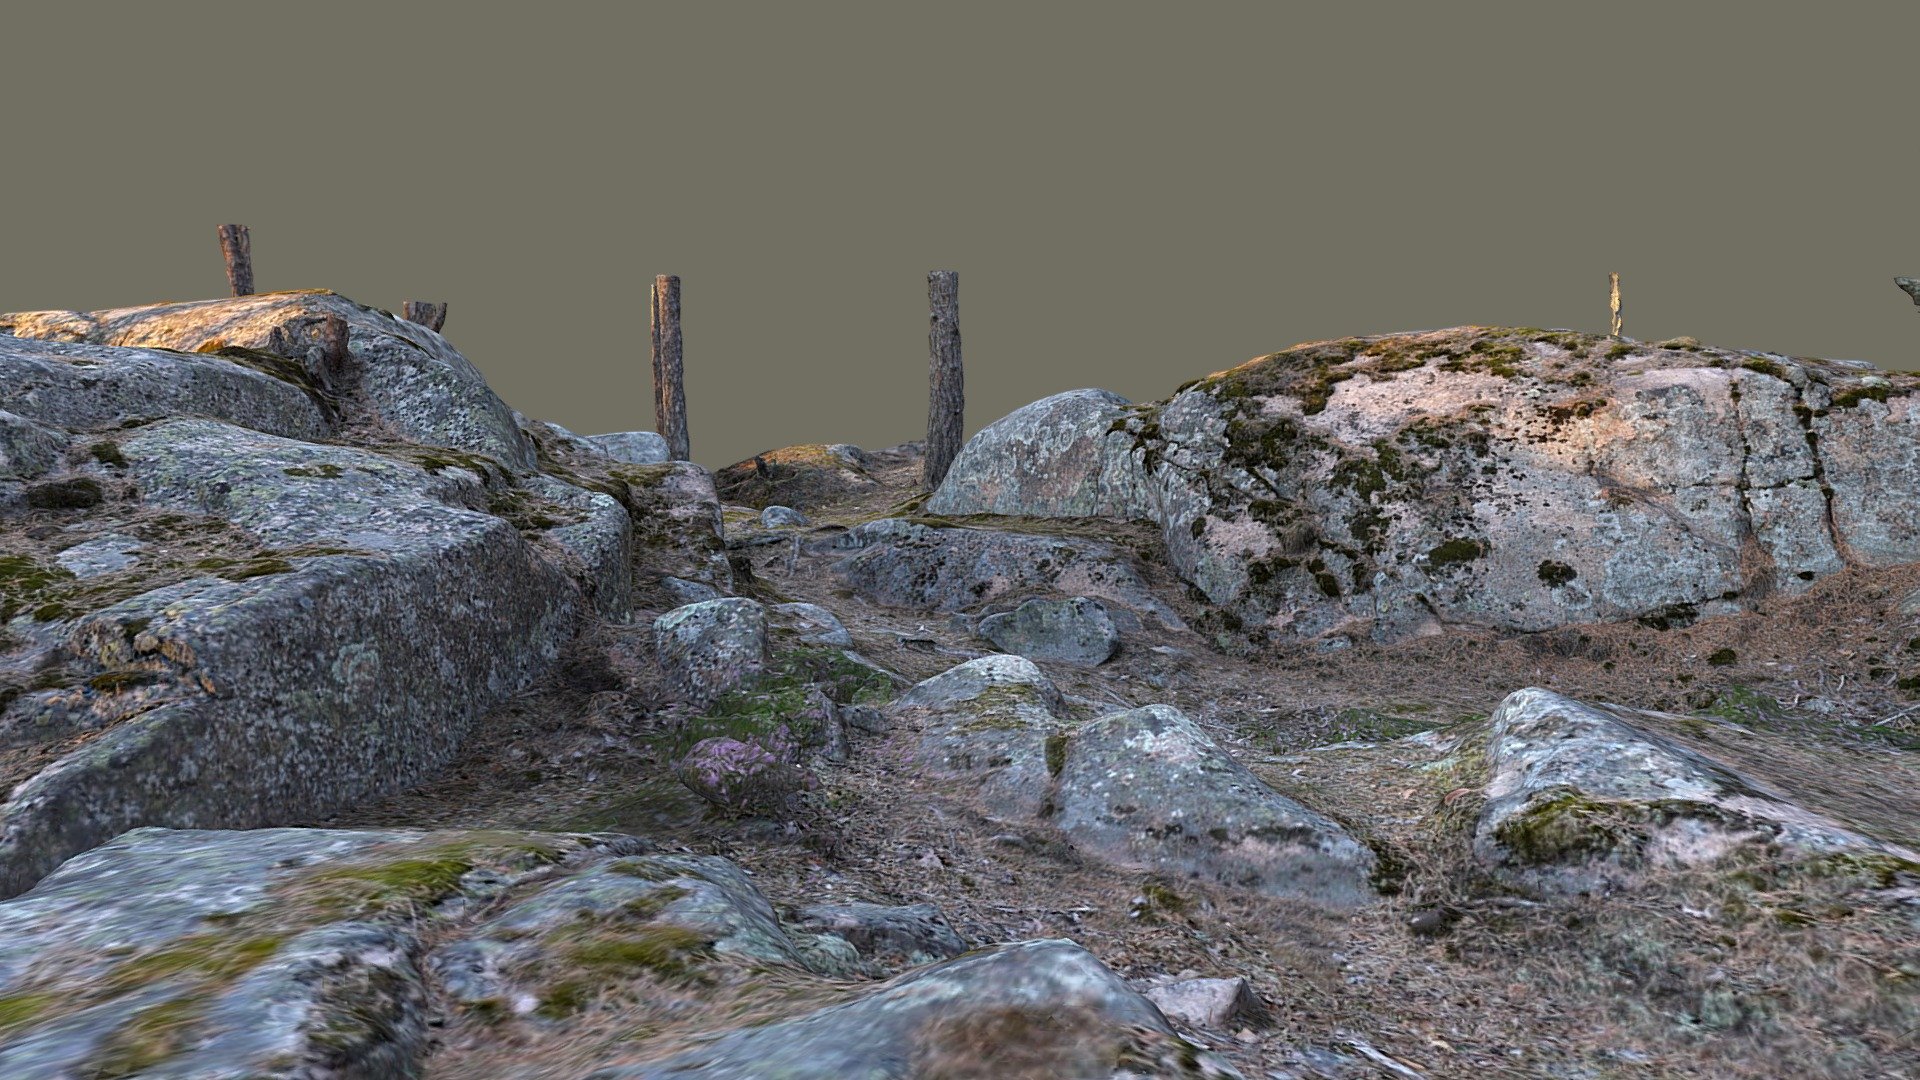 Rocky spot in nordic forest at golden hour.

Photos taken with A7Riv + 20mm Sony FE

Processed with Metashape + Blender + Instant meshes - Rock Terrain 4 - Download Free 3D model by Lassi Kaukonen (@thesidekick) 3d model